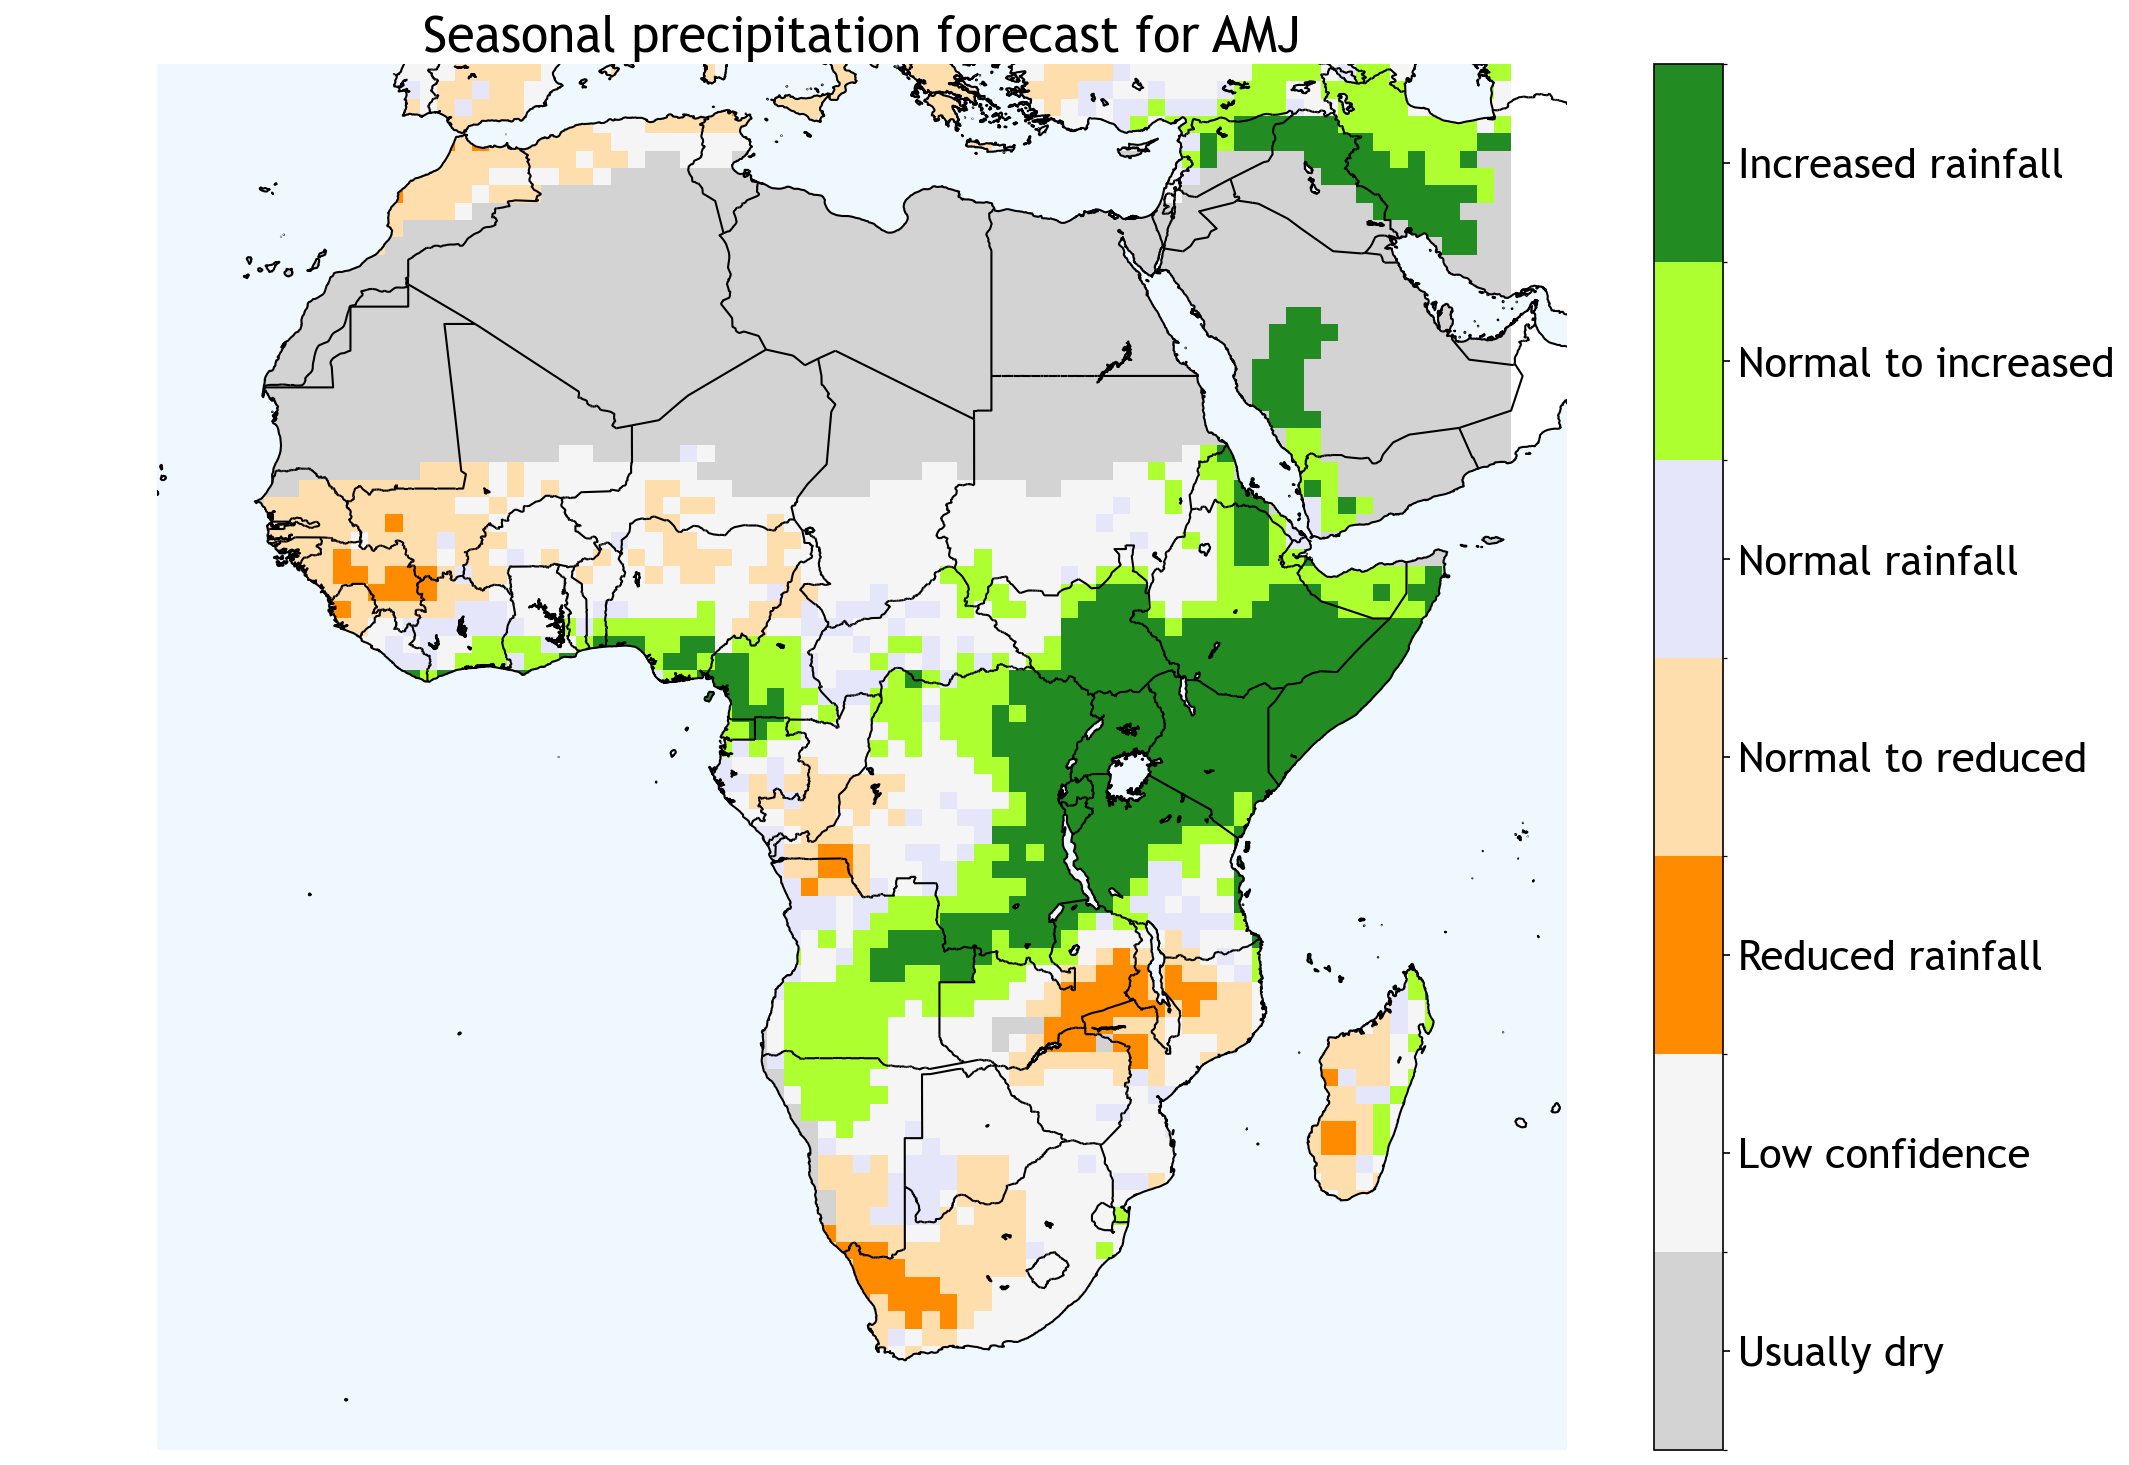 Seasonal precipitation forecast outlook for Africa for the coming 3 months